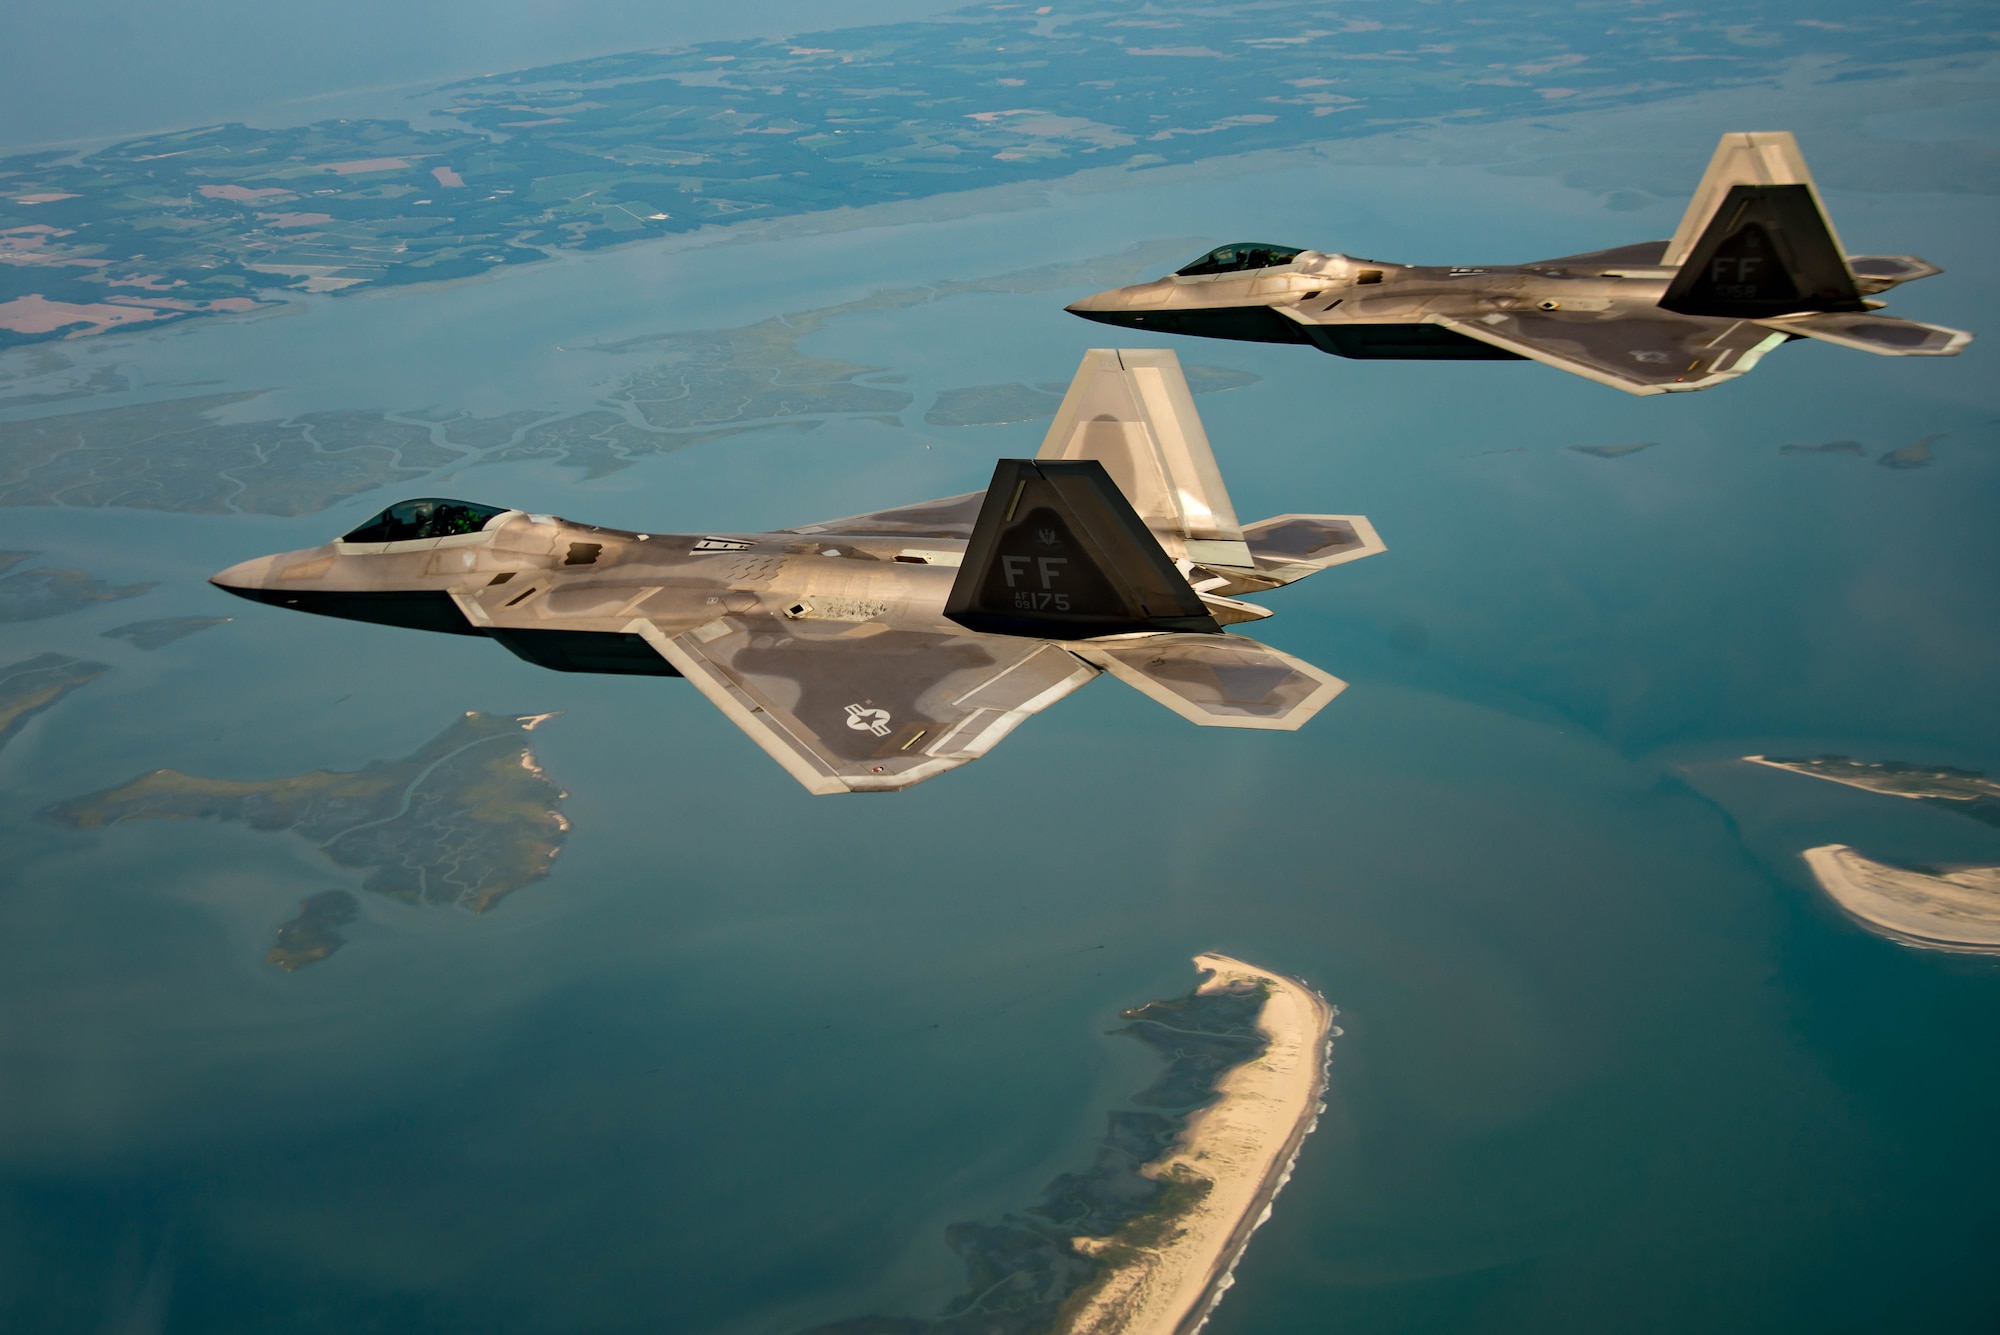 F-22A Raptors return to Langley Air Force Base after dropping Joint Direct Attack Munitions during the 95th anniversary of Maj. Gen. William “Billy” Mitchell bombing the Ostfriesland at Langley Air Force Base, Va., July 22, 2016. Seven fighter wings, eight different airframes and 33 aircrews Air Force-wide supported the two-day event by taking off from, Langley
AFB, and flying the same path the 1st Provisional Air Brigade flew and drop
inert bombs where the sunken, Ostfriesland lies. (U.S. Air Force photo by Staff Sgt. J.D. Strong II)